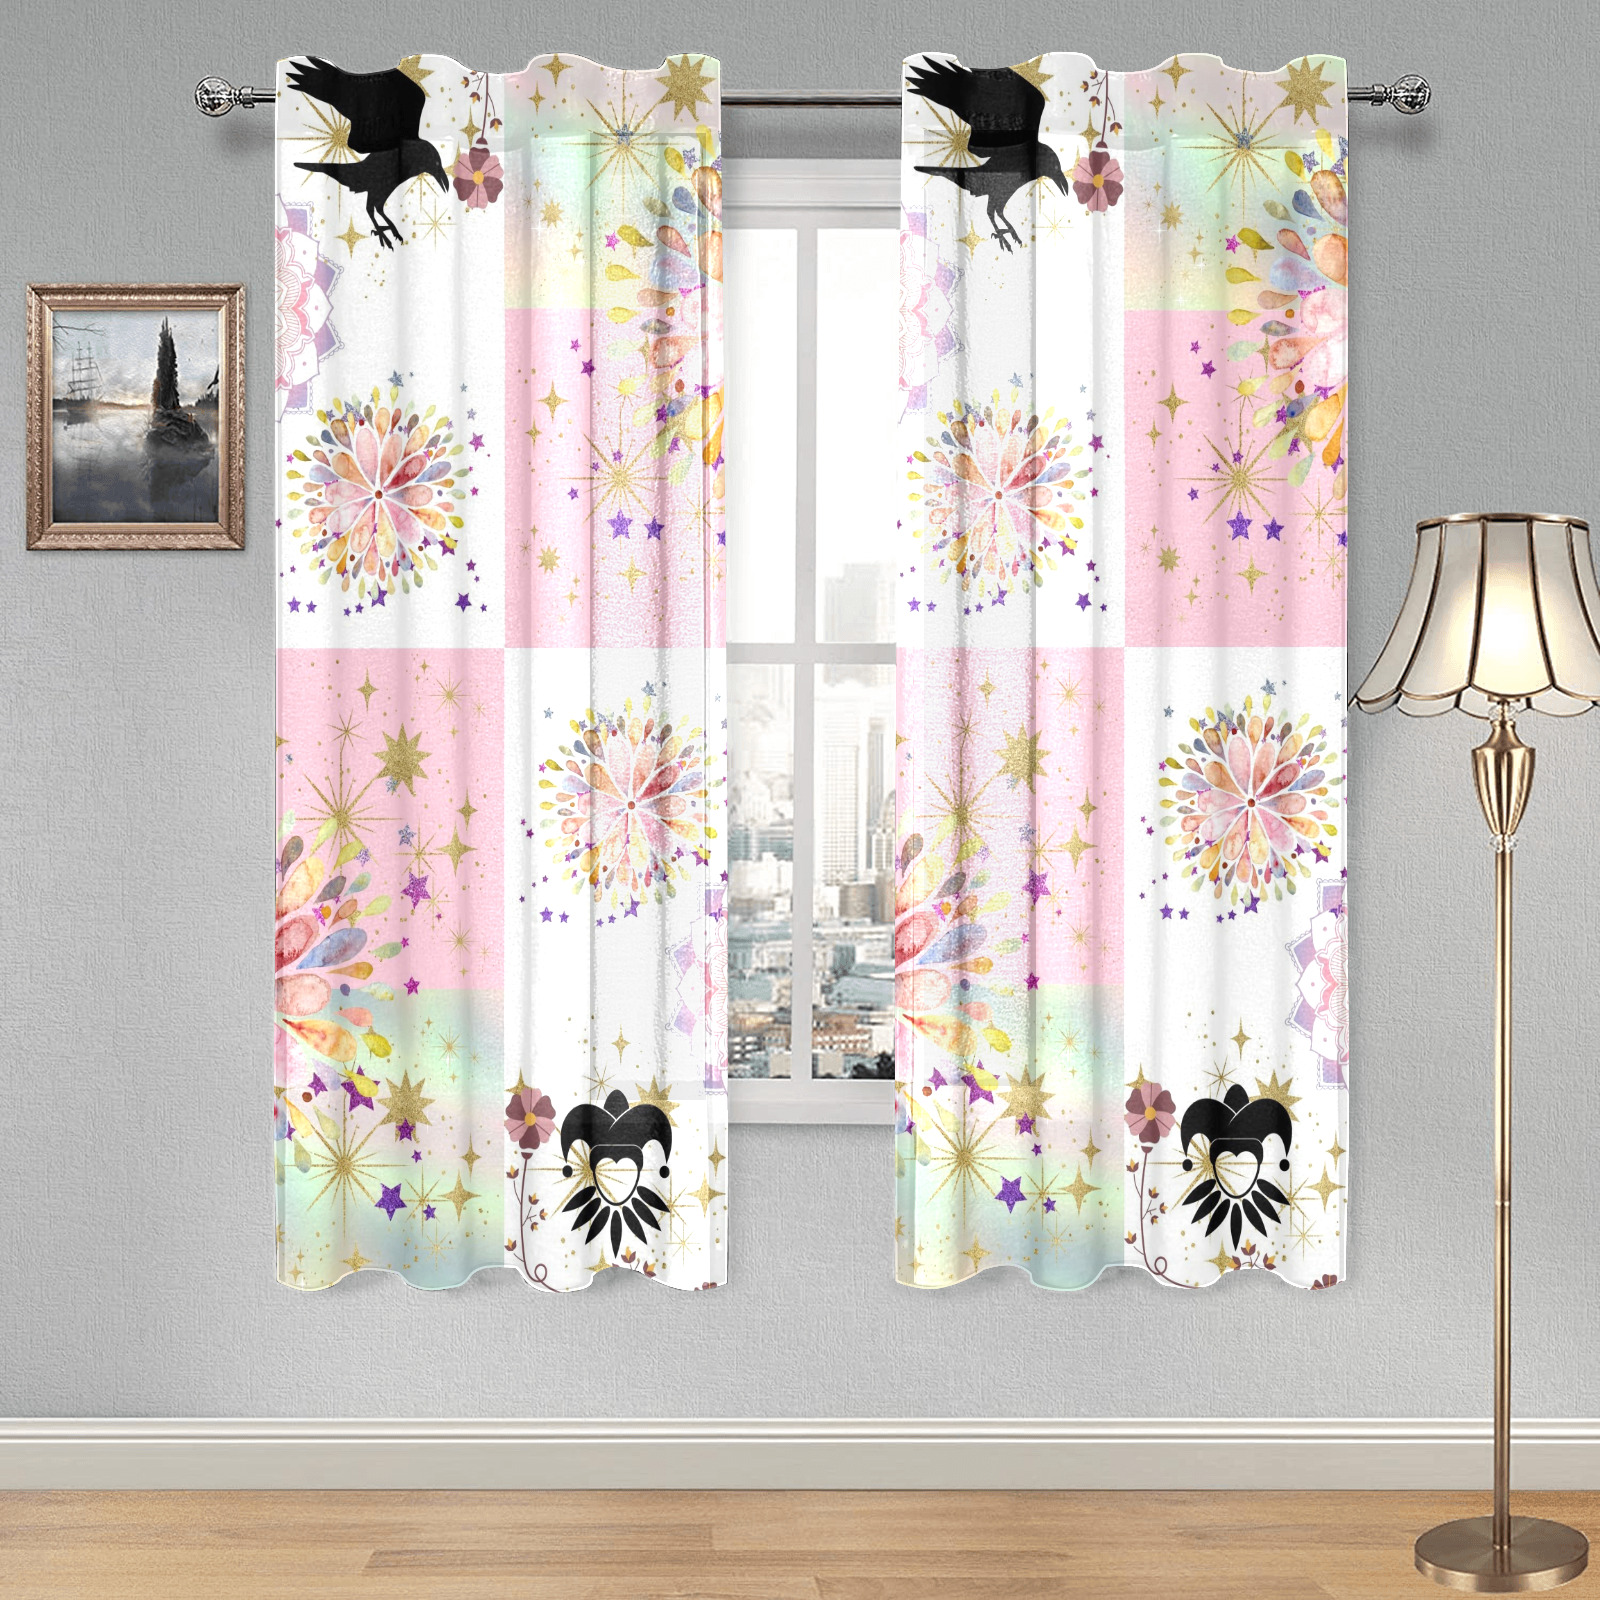 Secret Garden With Harlequin and Crow Patch Artwork Gauze Curtain 28"x63" (Two-Piece)